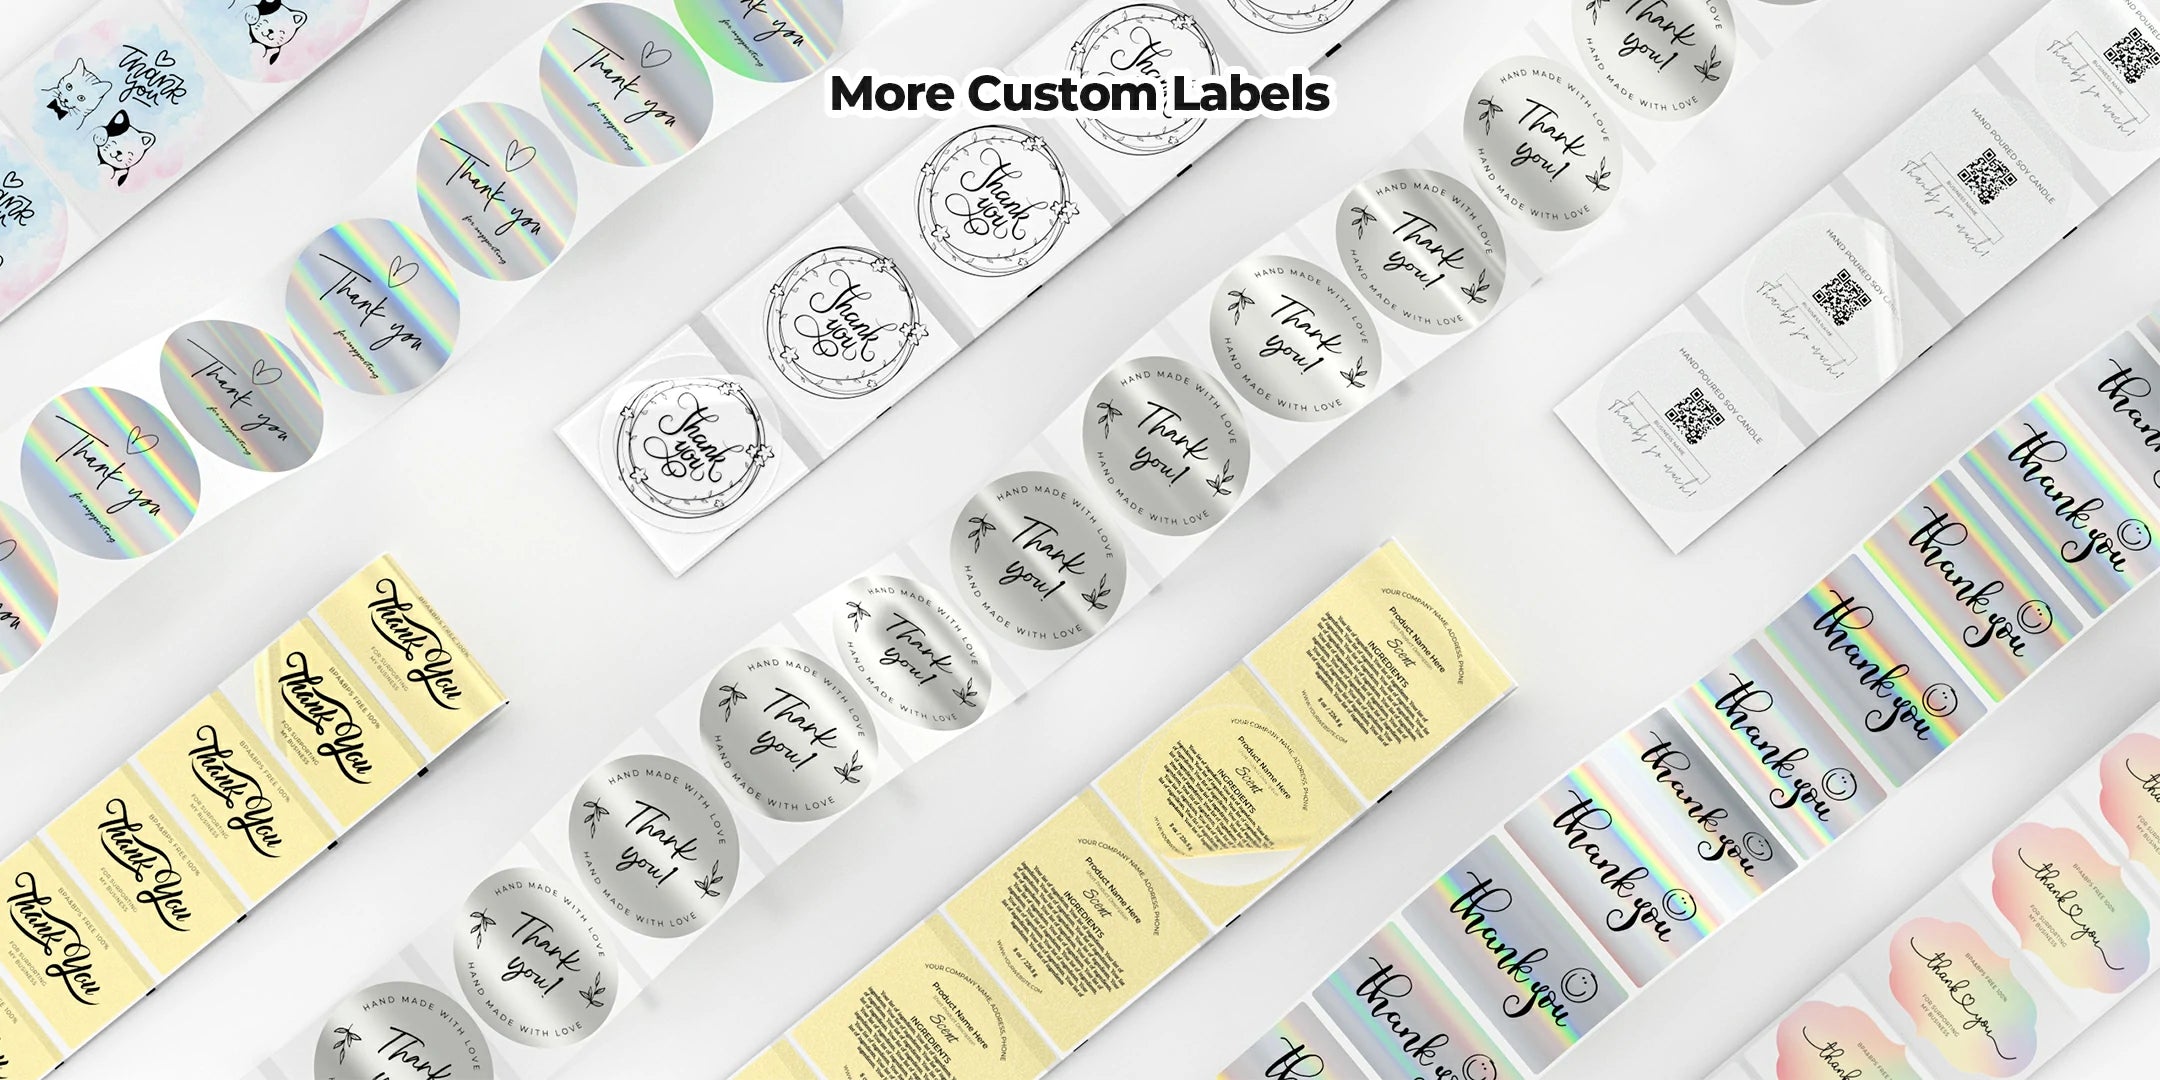 MUNBYN provides various creative personalized thermal labels.